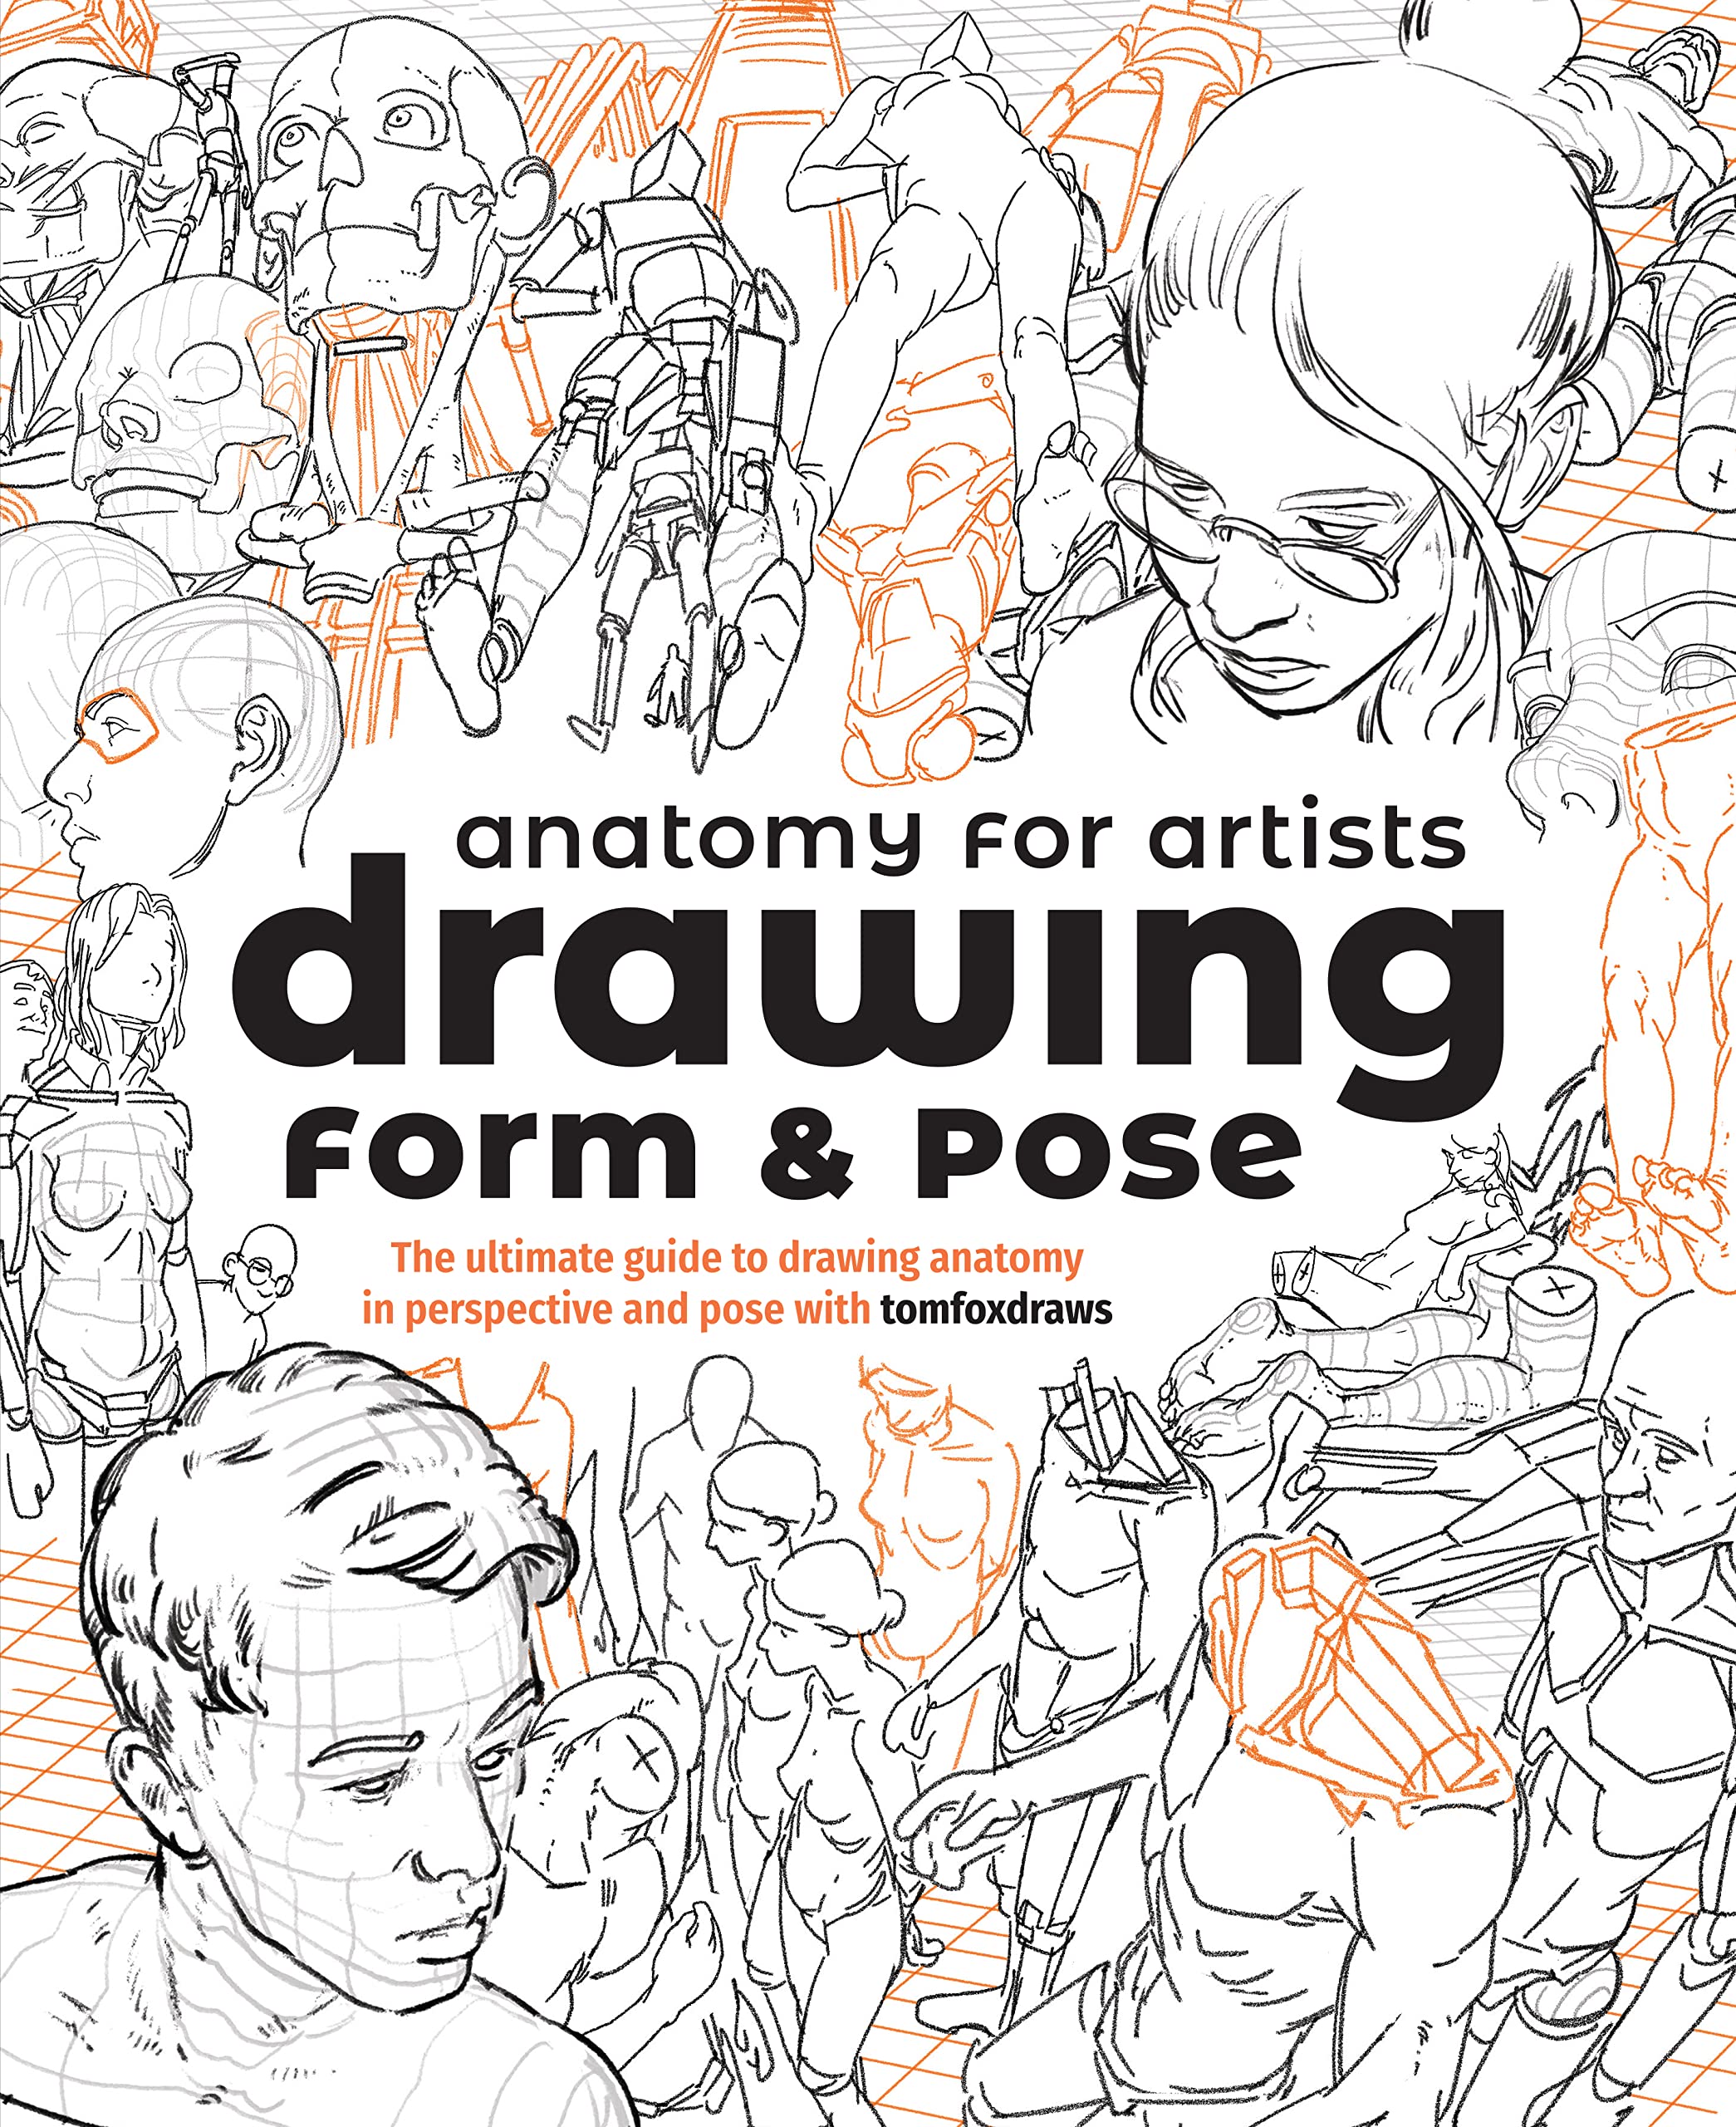 Anatomy for Artists: Drawing Form & Pose: The Ultimate Guide to Drawing Anatomy in Perspective and Pose with Tomfoxdraws - SureShot Books Publishing LLC